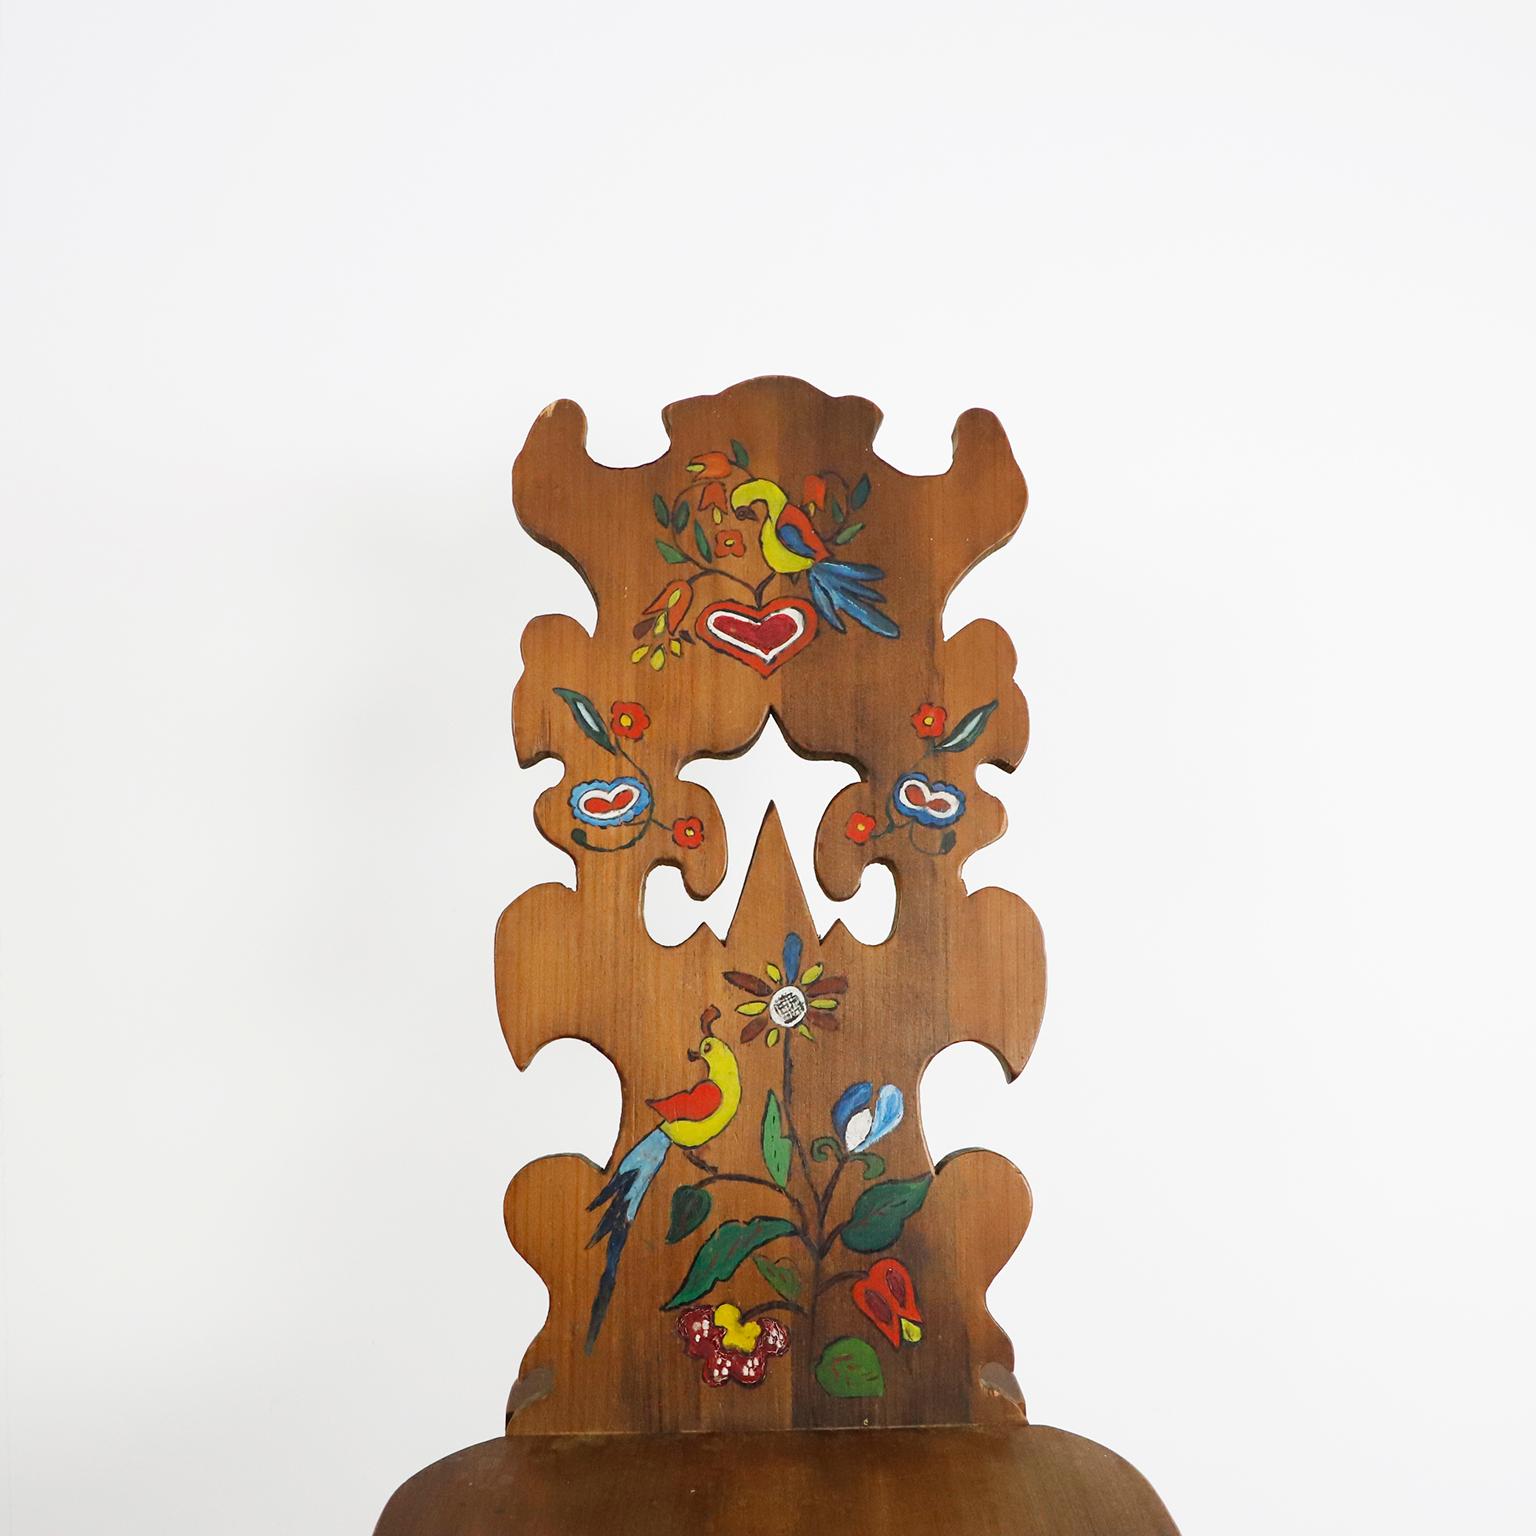 We offer this rare an amazing chair hand painted designed by Don Shoemaker, circa 1960, includes